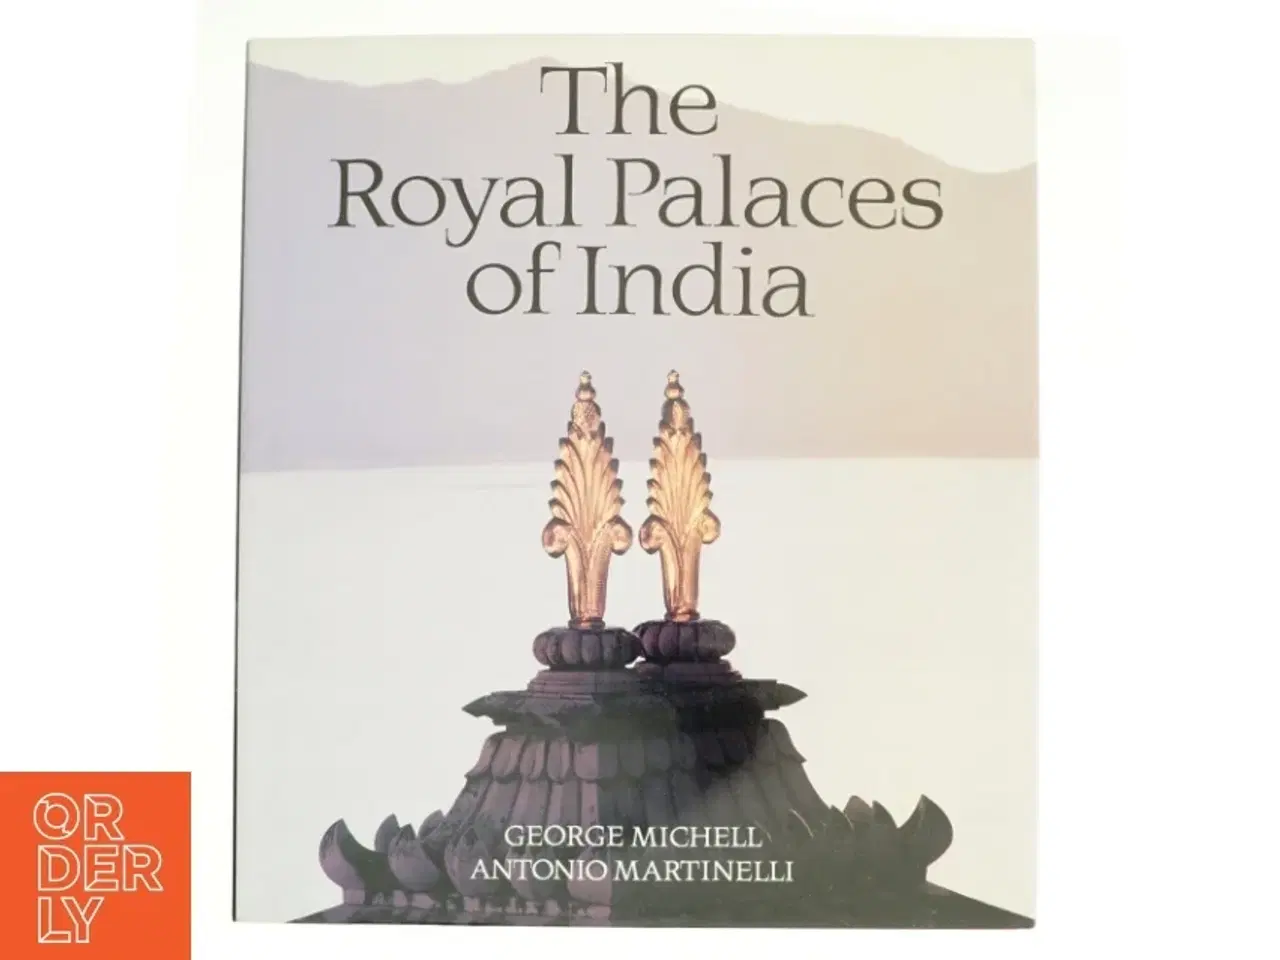 Billede 1 - The Royal Palaces of India af George Michell, Antonio Martinelli (Bog)